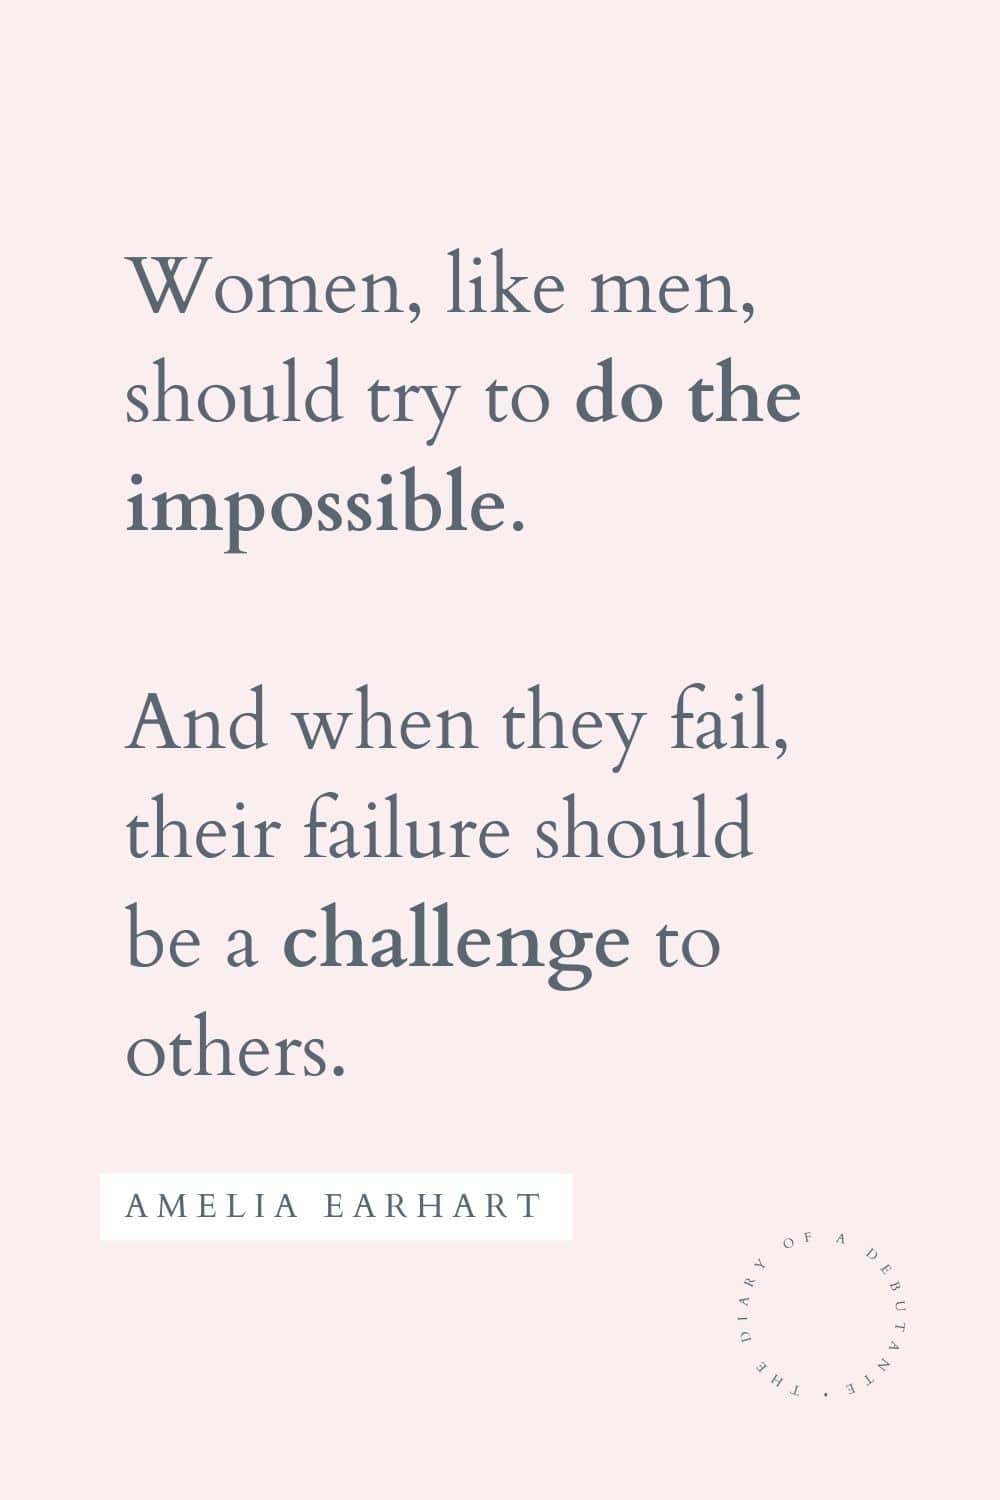 Amelia Earhart quote about doing the impossible curated as a collection of inspiring female quotes for Women's History Month by Stephanie Ziajka on Diary of a Debutante